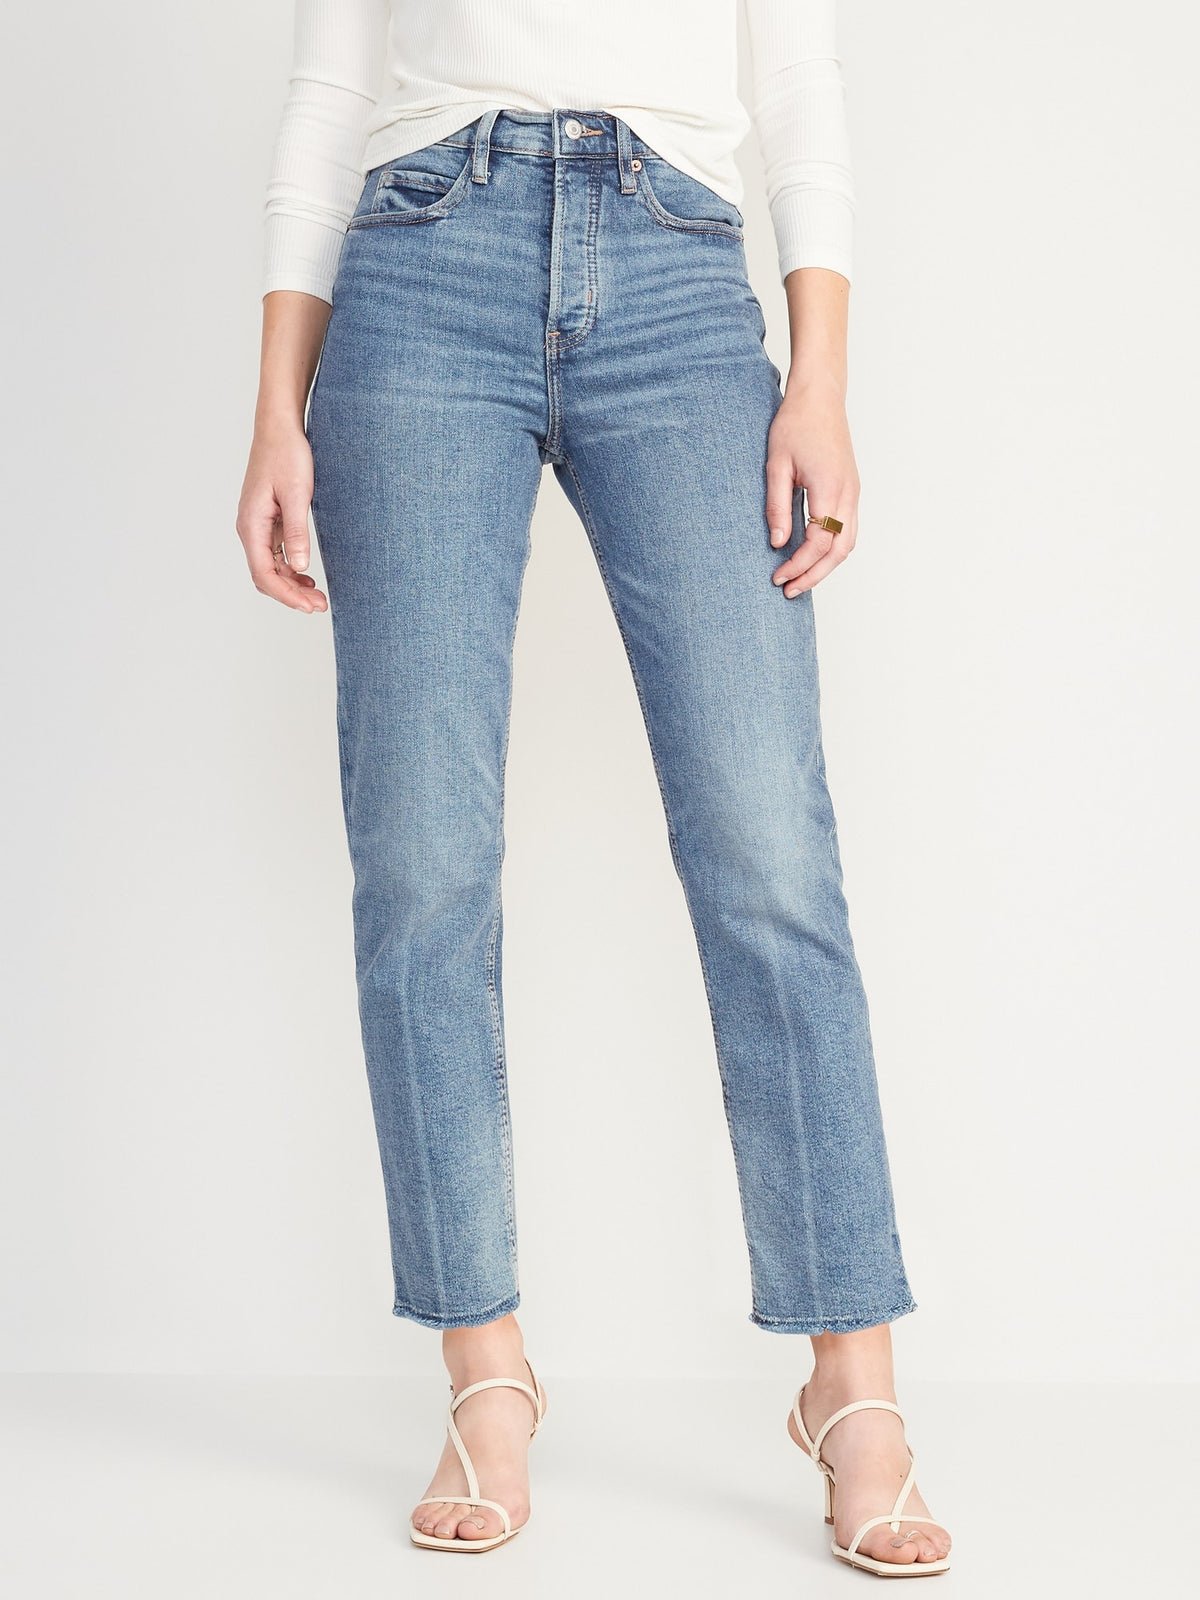 Extra High-Waisted Button-Fly Sky-Hi Straight Cut-Off Jeans for Women_Suki_3250.jpeg